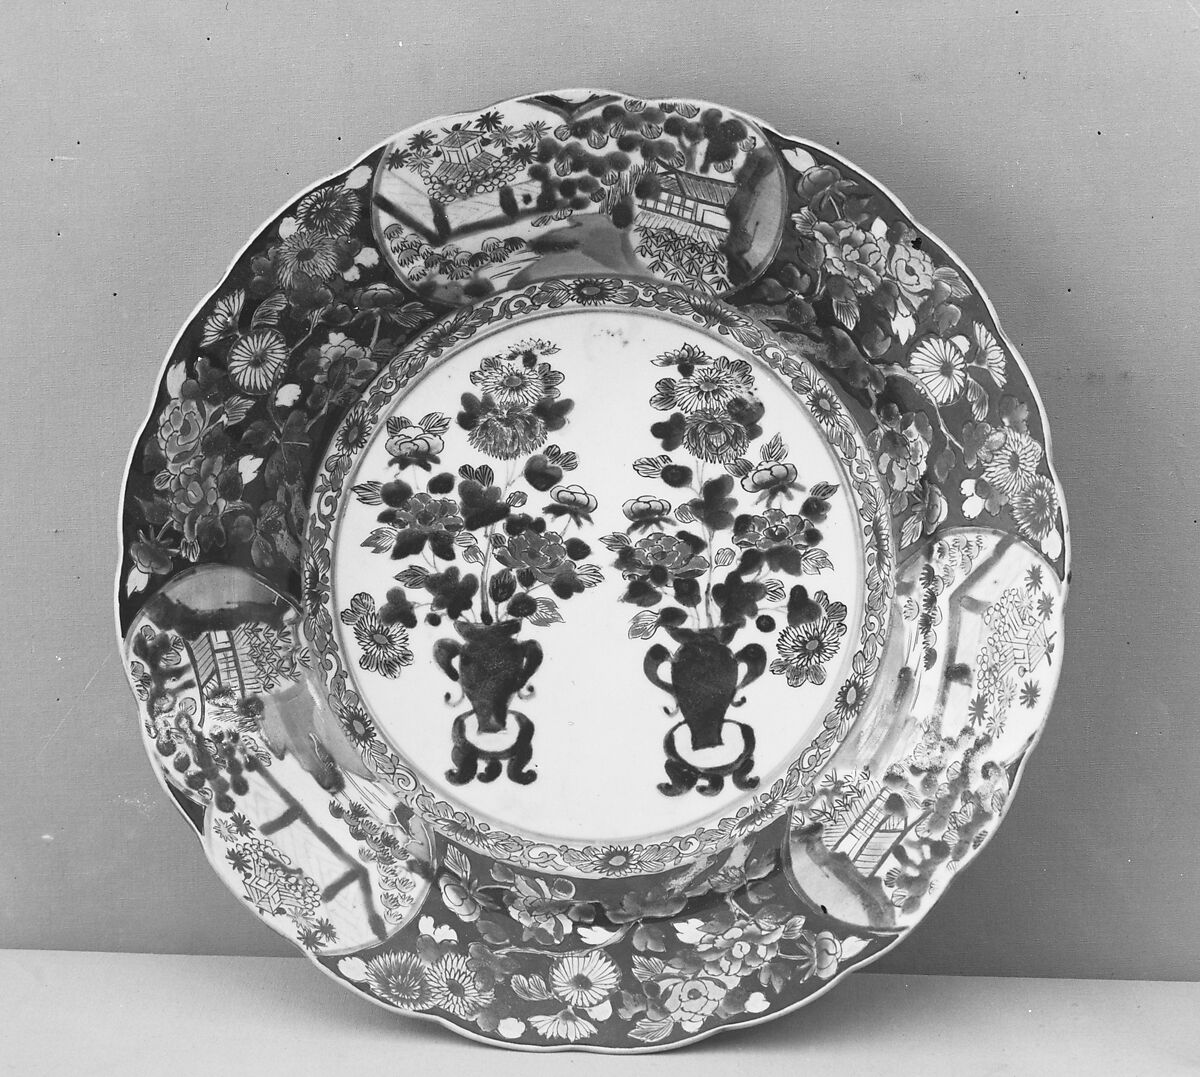 Large Dish with Flower Vases and Landscapes in Cartouches, Porcelain with underglaze blue and overglaze polychrome enamels, gold (Arita ware, Imari type), Japan 